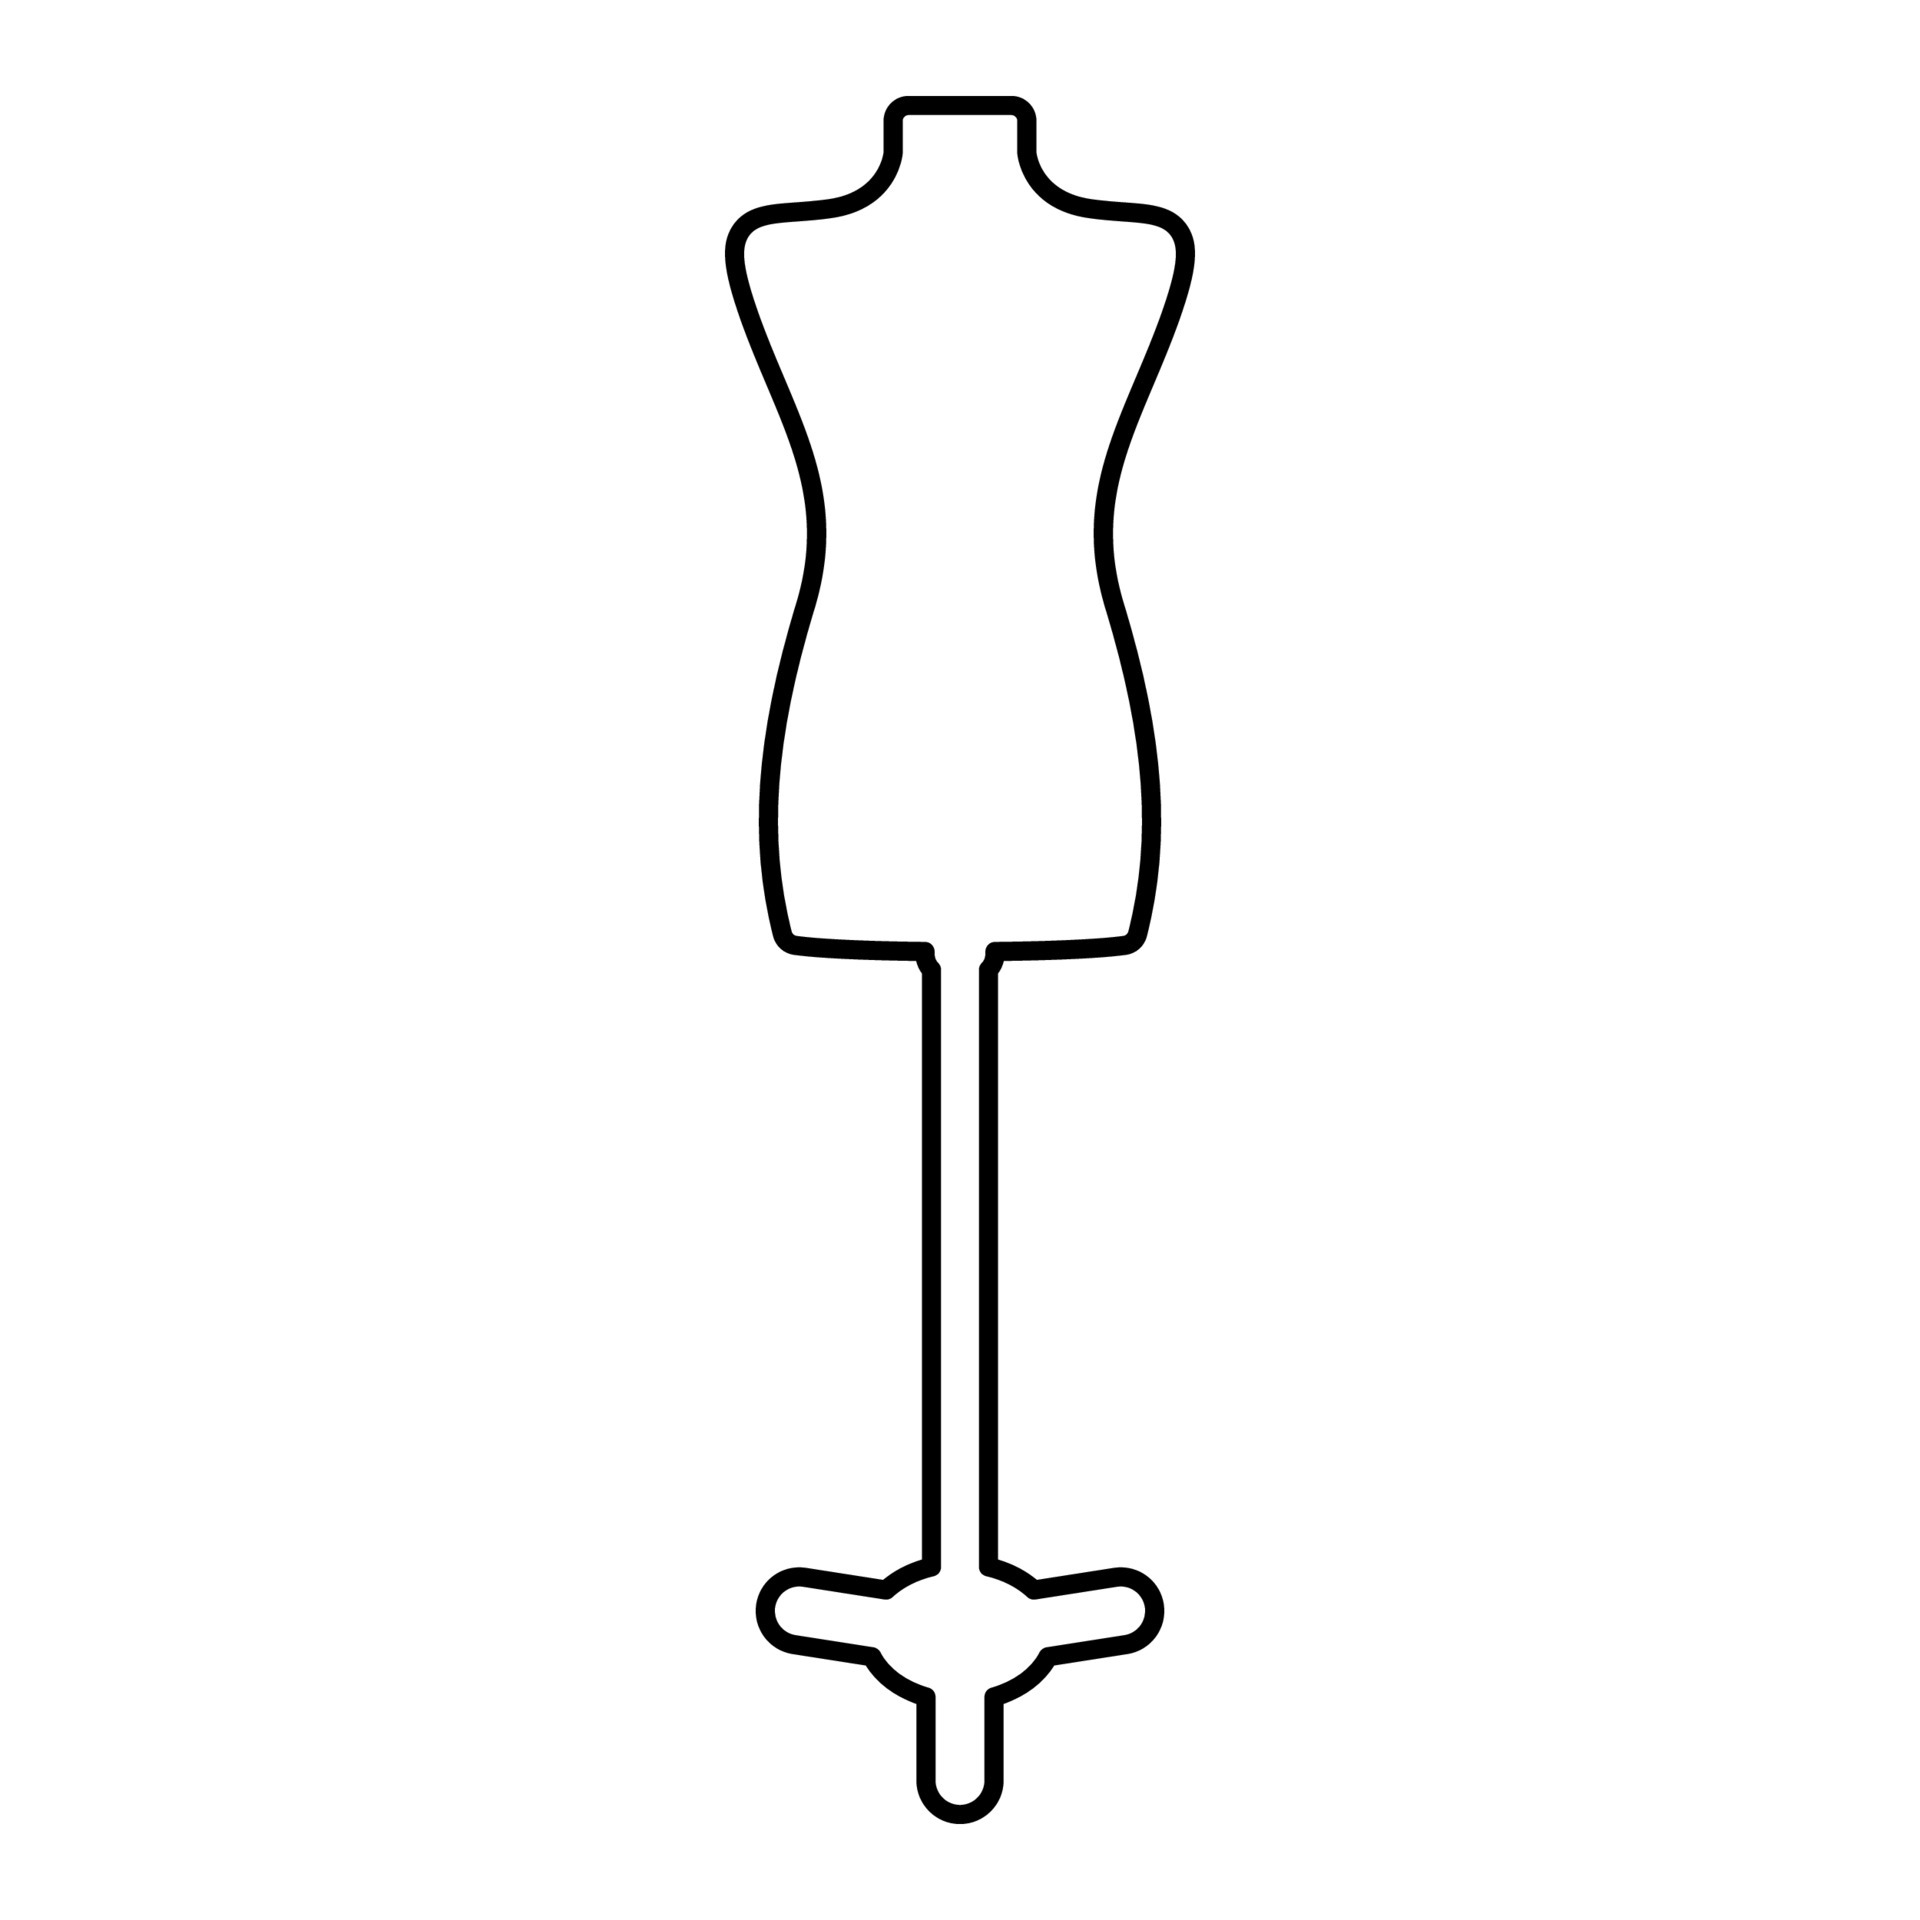 Fashion Drawing Mannequin Front Vector Images (over 970)